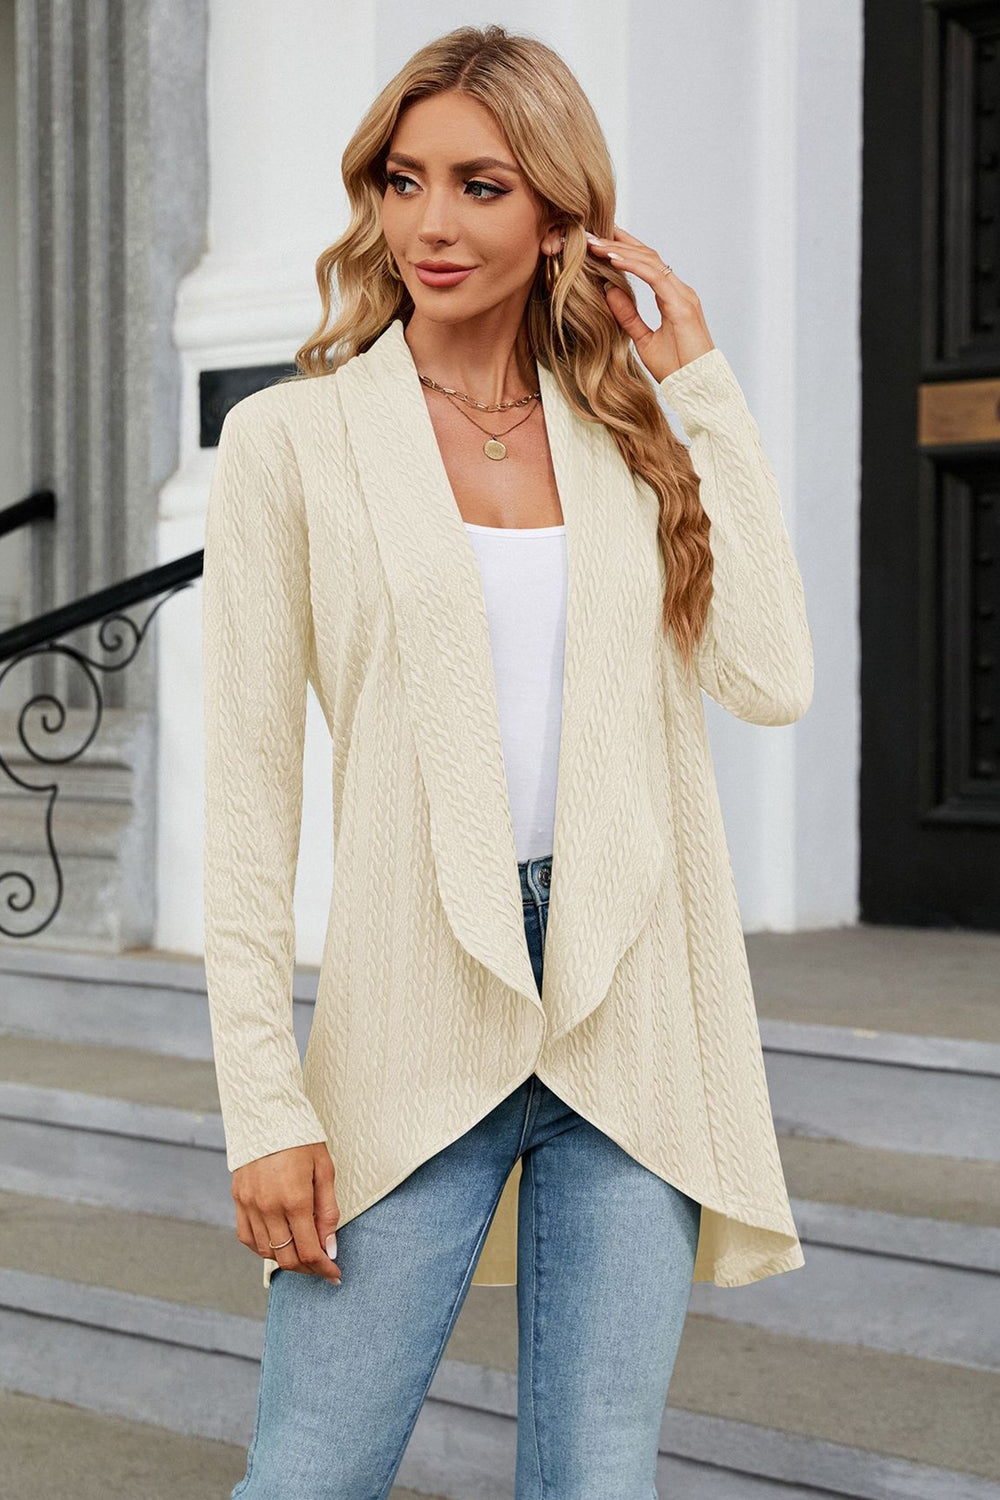 Open Front Long Sleeve Cardigan - White / S - Women’s Clothing & Accessories - Shirts & Tops - 1 - 2024